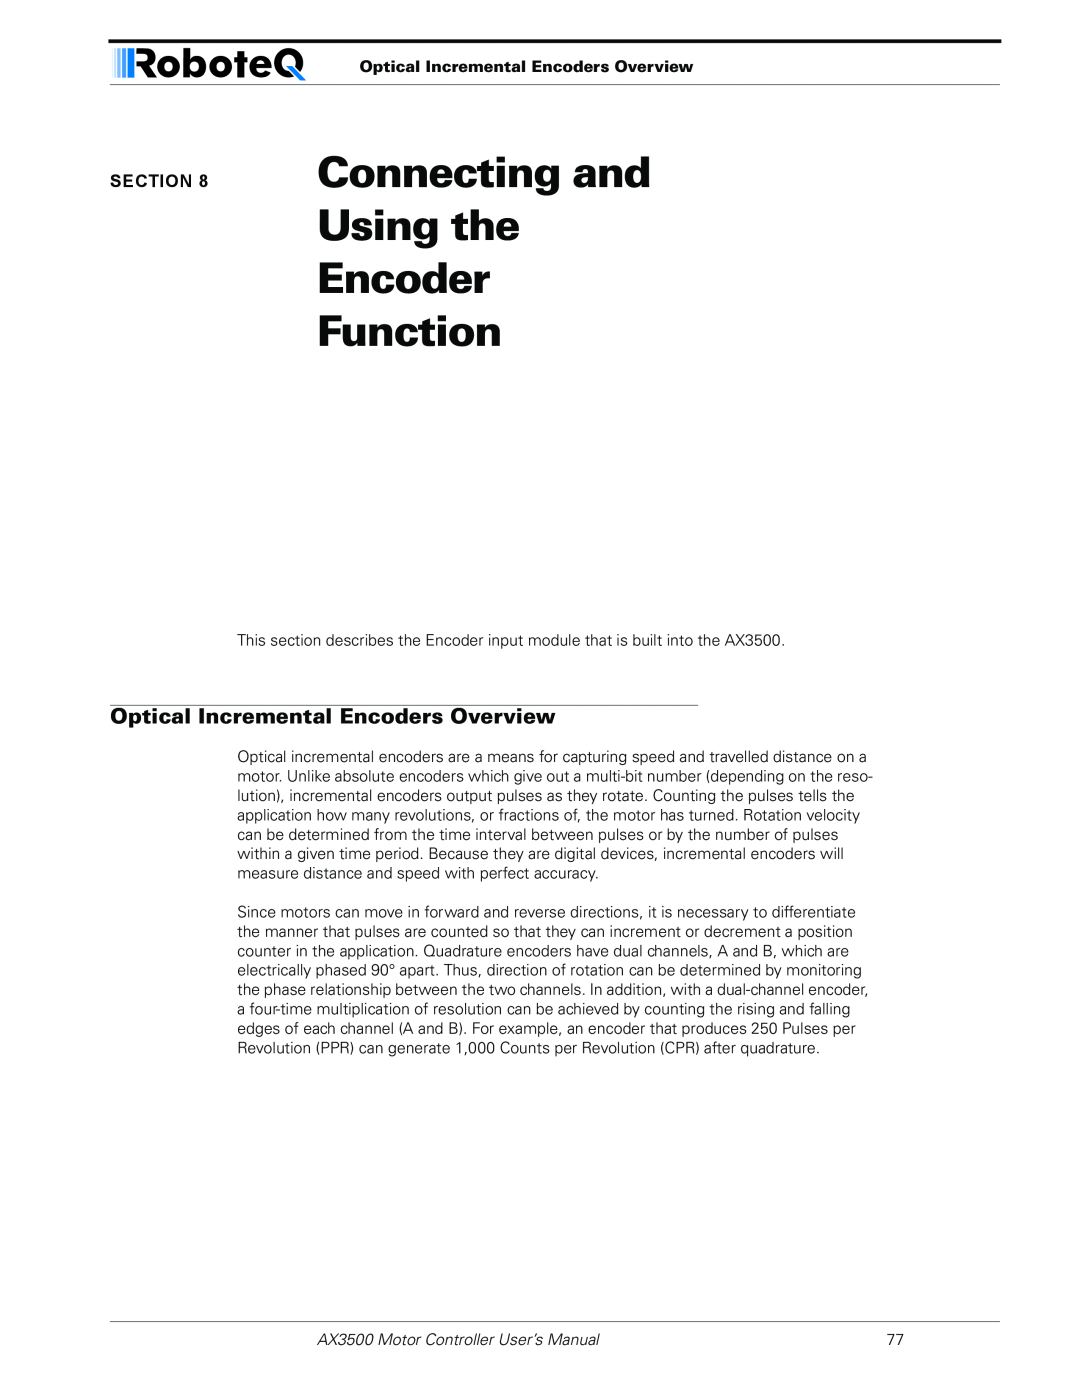 RoboteQ AX3500 user manual Connecting and Using the Encoder Function, Optical Incremental Encoders Overview 